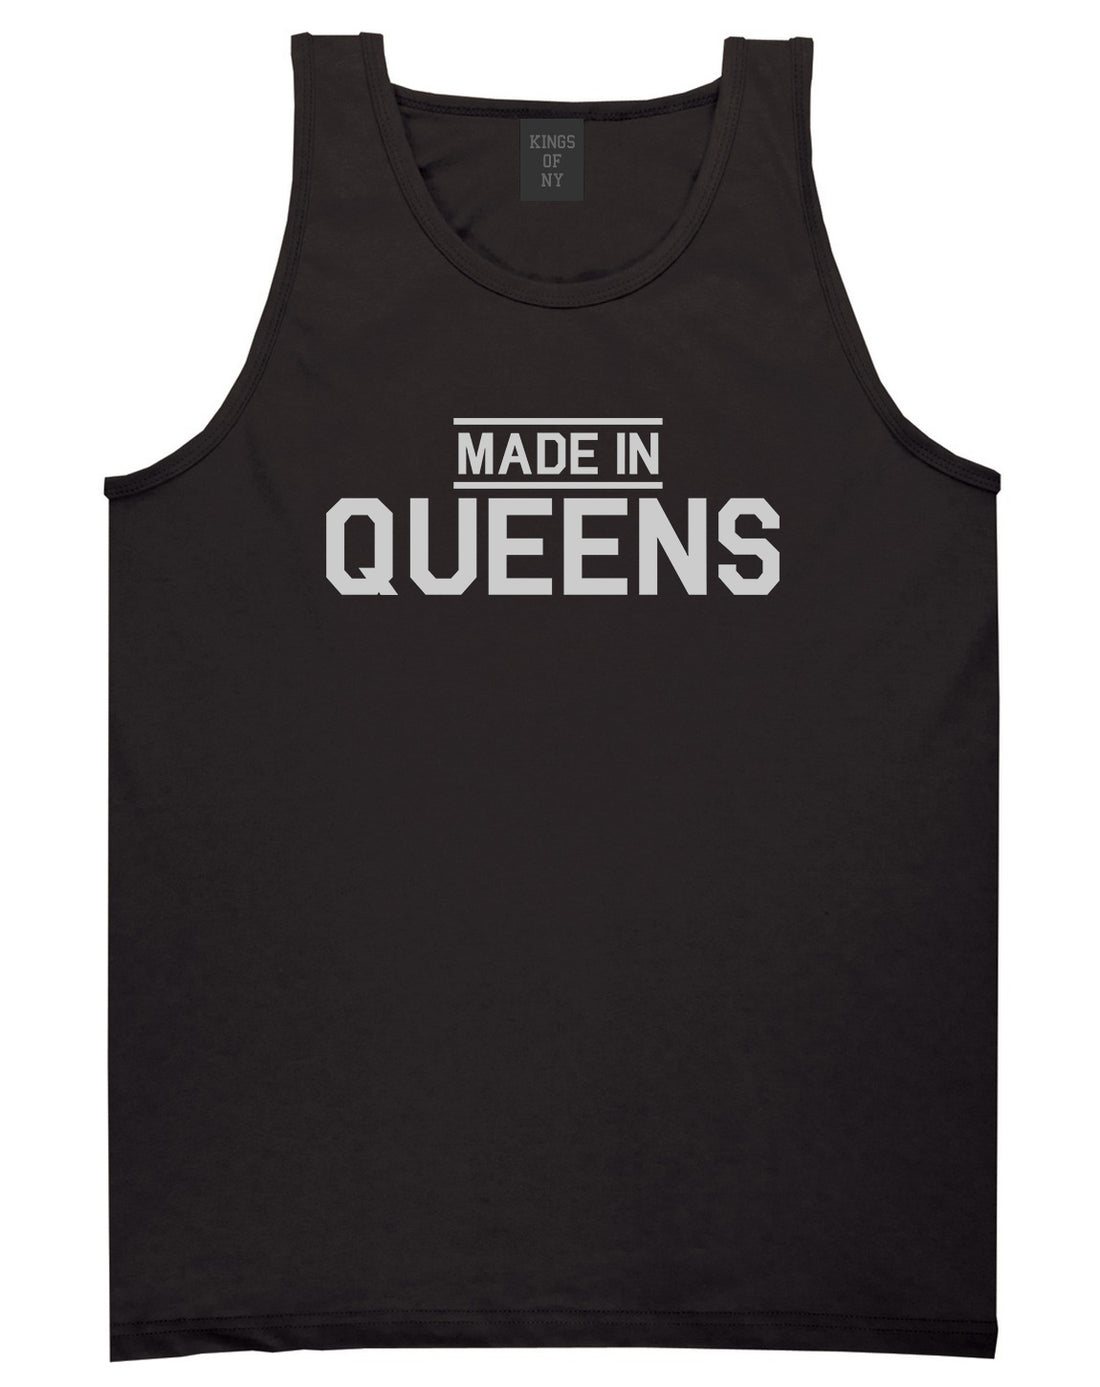 Made In Queens NY Mens Tank Top T-Shirt Black